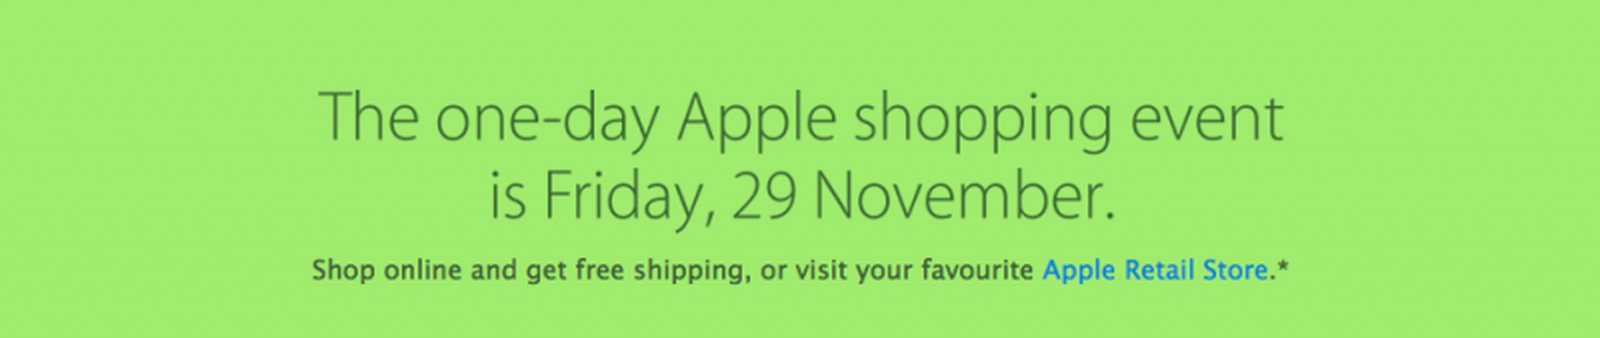 Apple Posts Black Friday 2013 'One-Day Shopping Event' Teaser - MacRumors